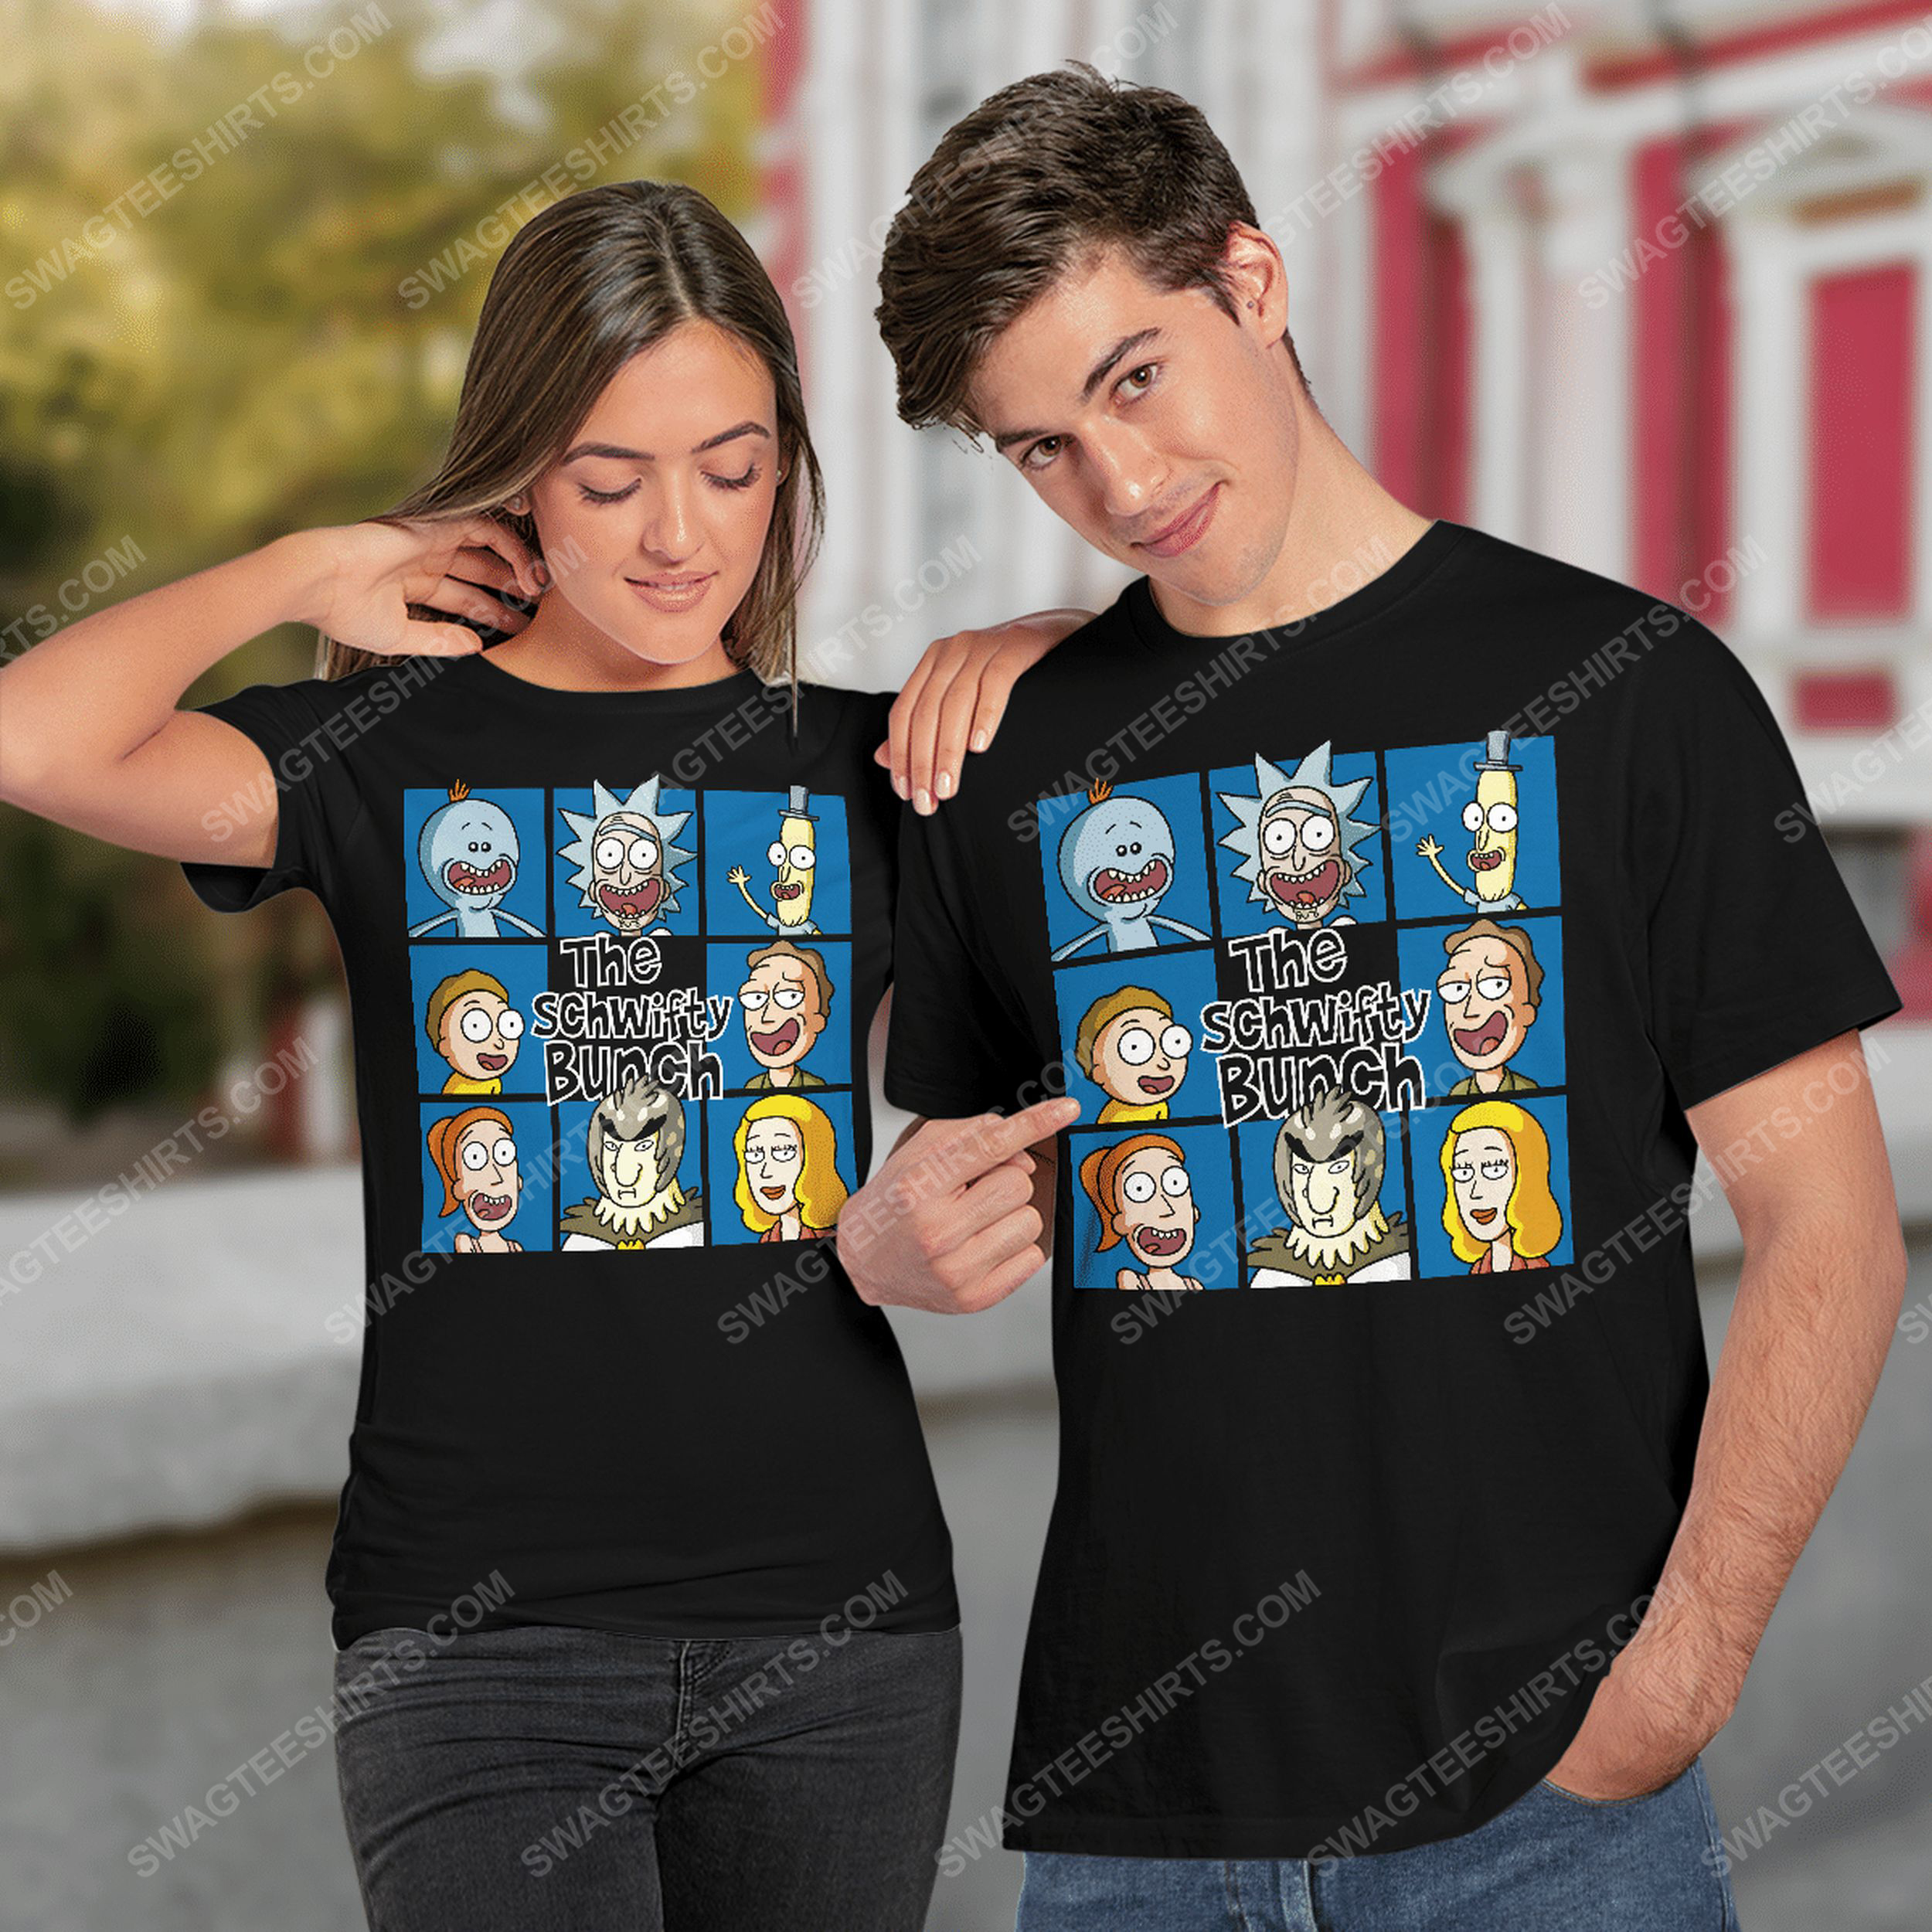 The schwifty bunch rick and morty tv show tshirt(1)